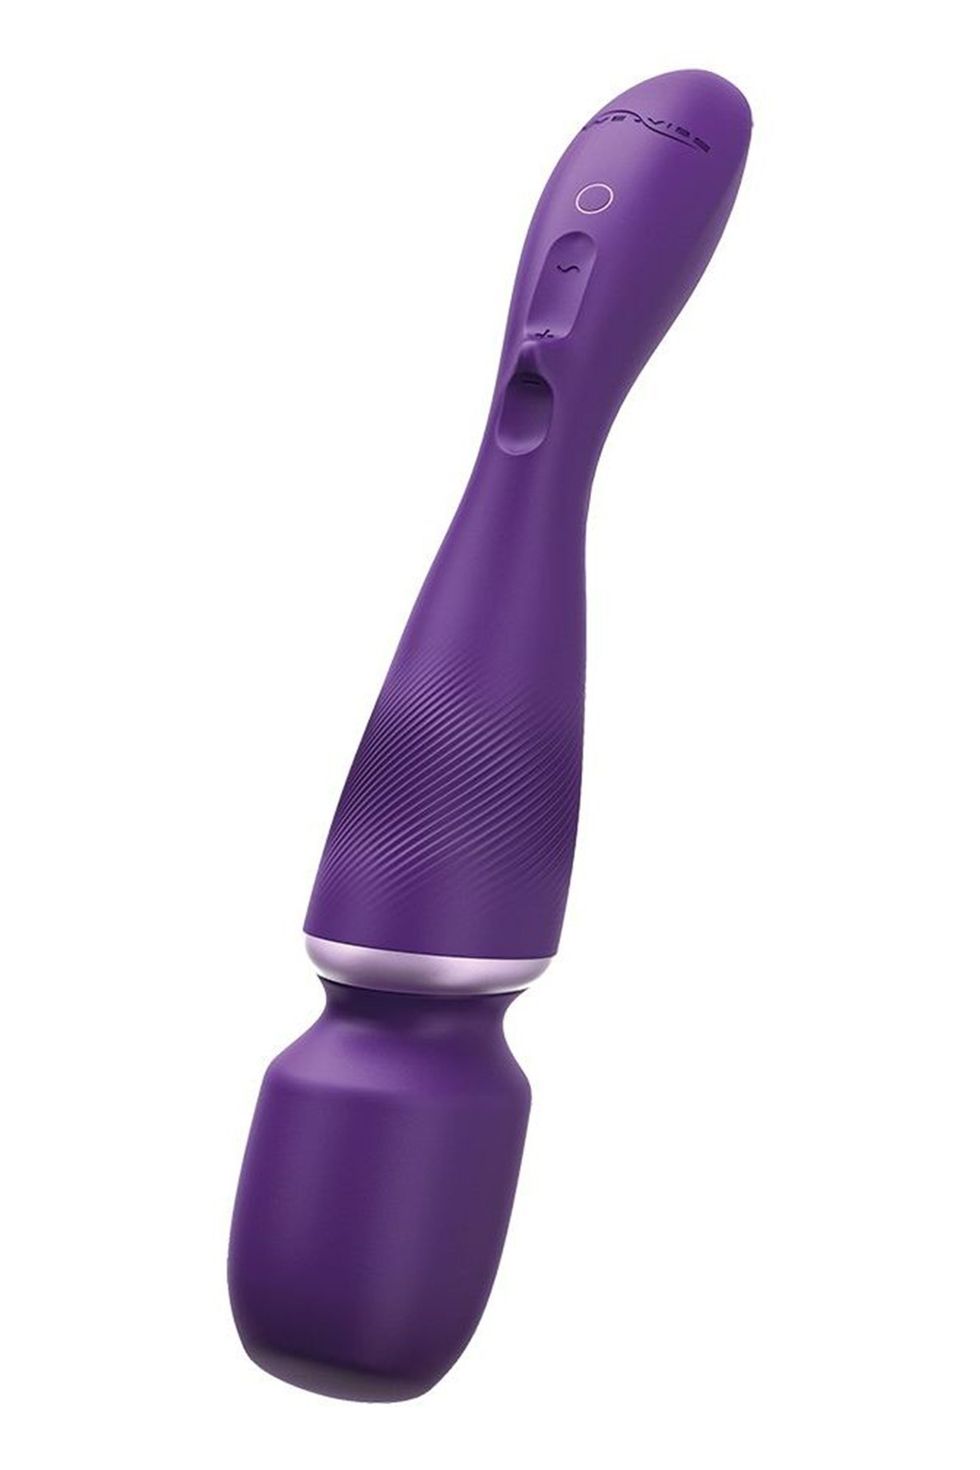 The 30 Best Couples' Sex Toys, According to Reviews - PureWow